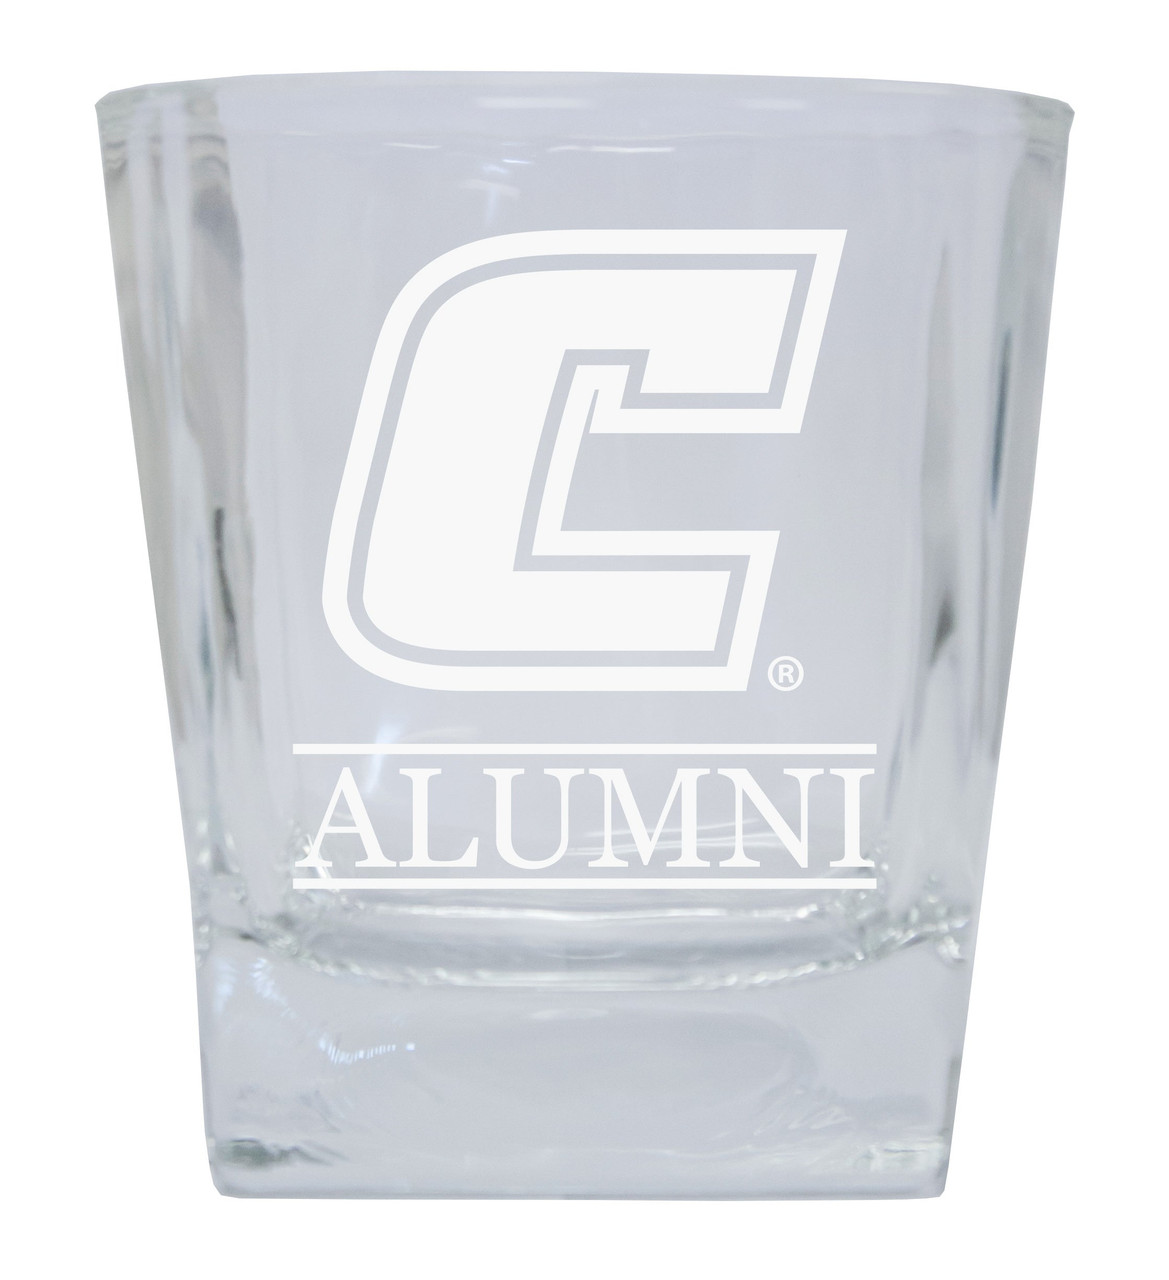 University of Tennessee at Chattanooga Etched Alumni 5 oz Shooter Glass Tumbler 4-Pack